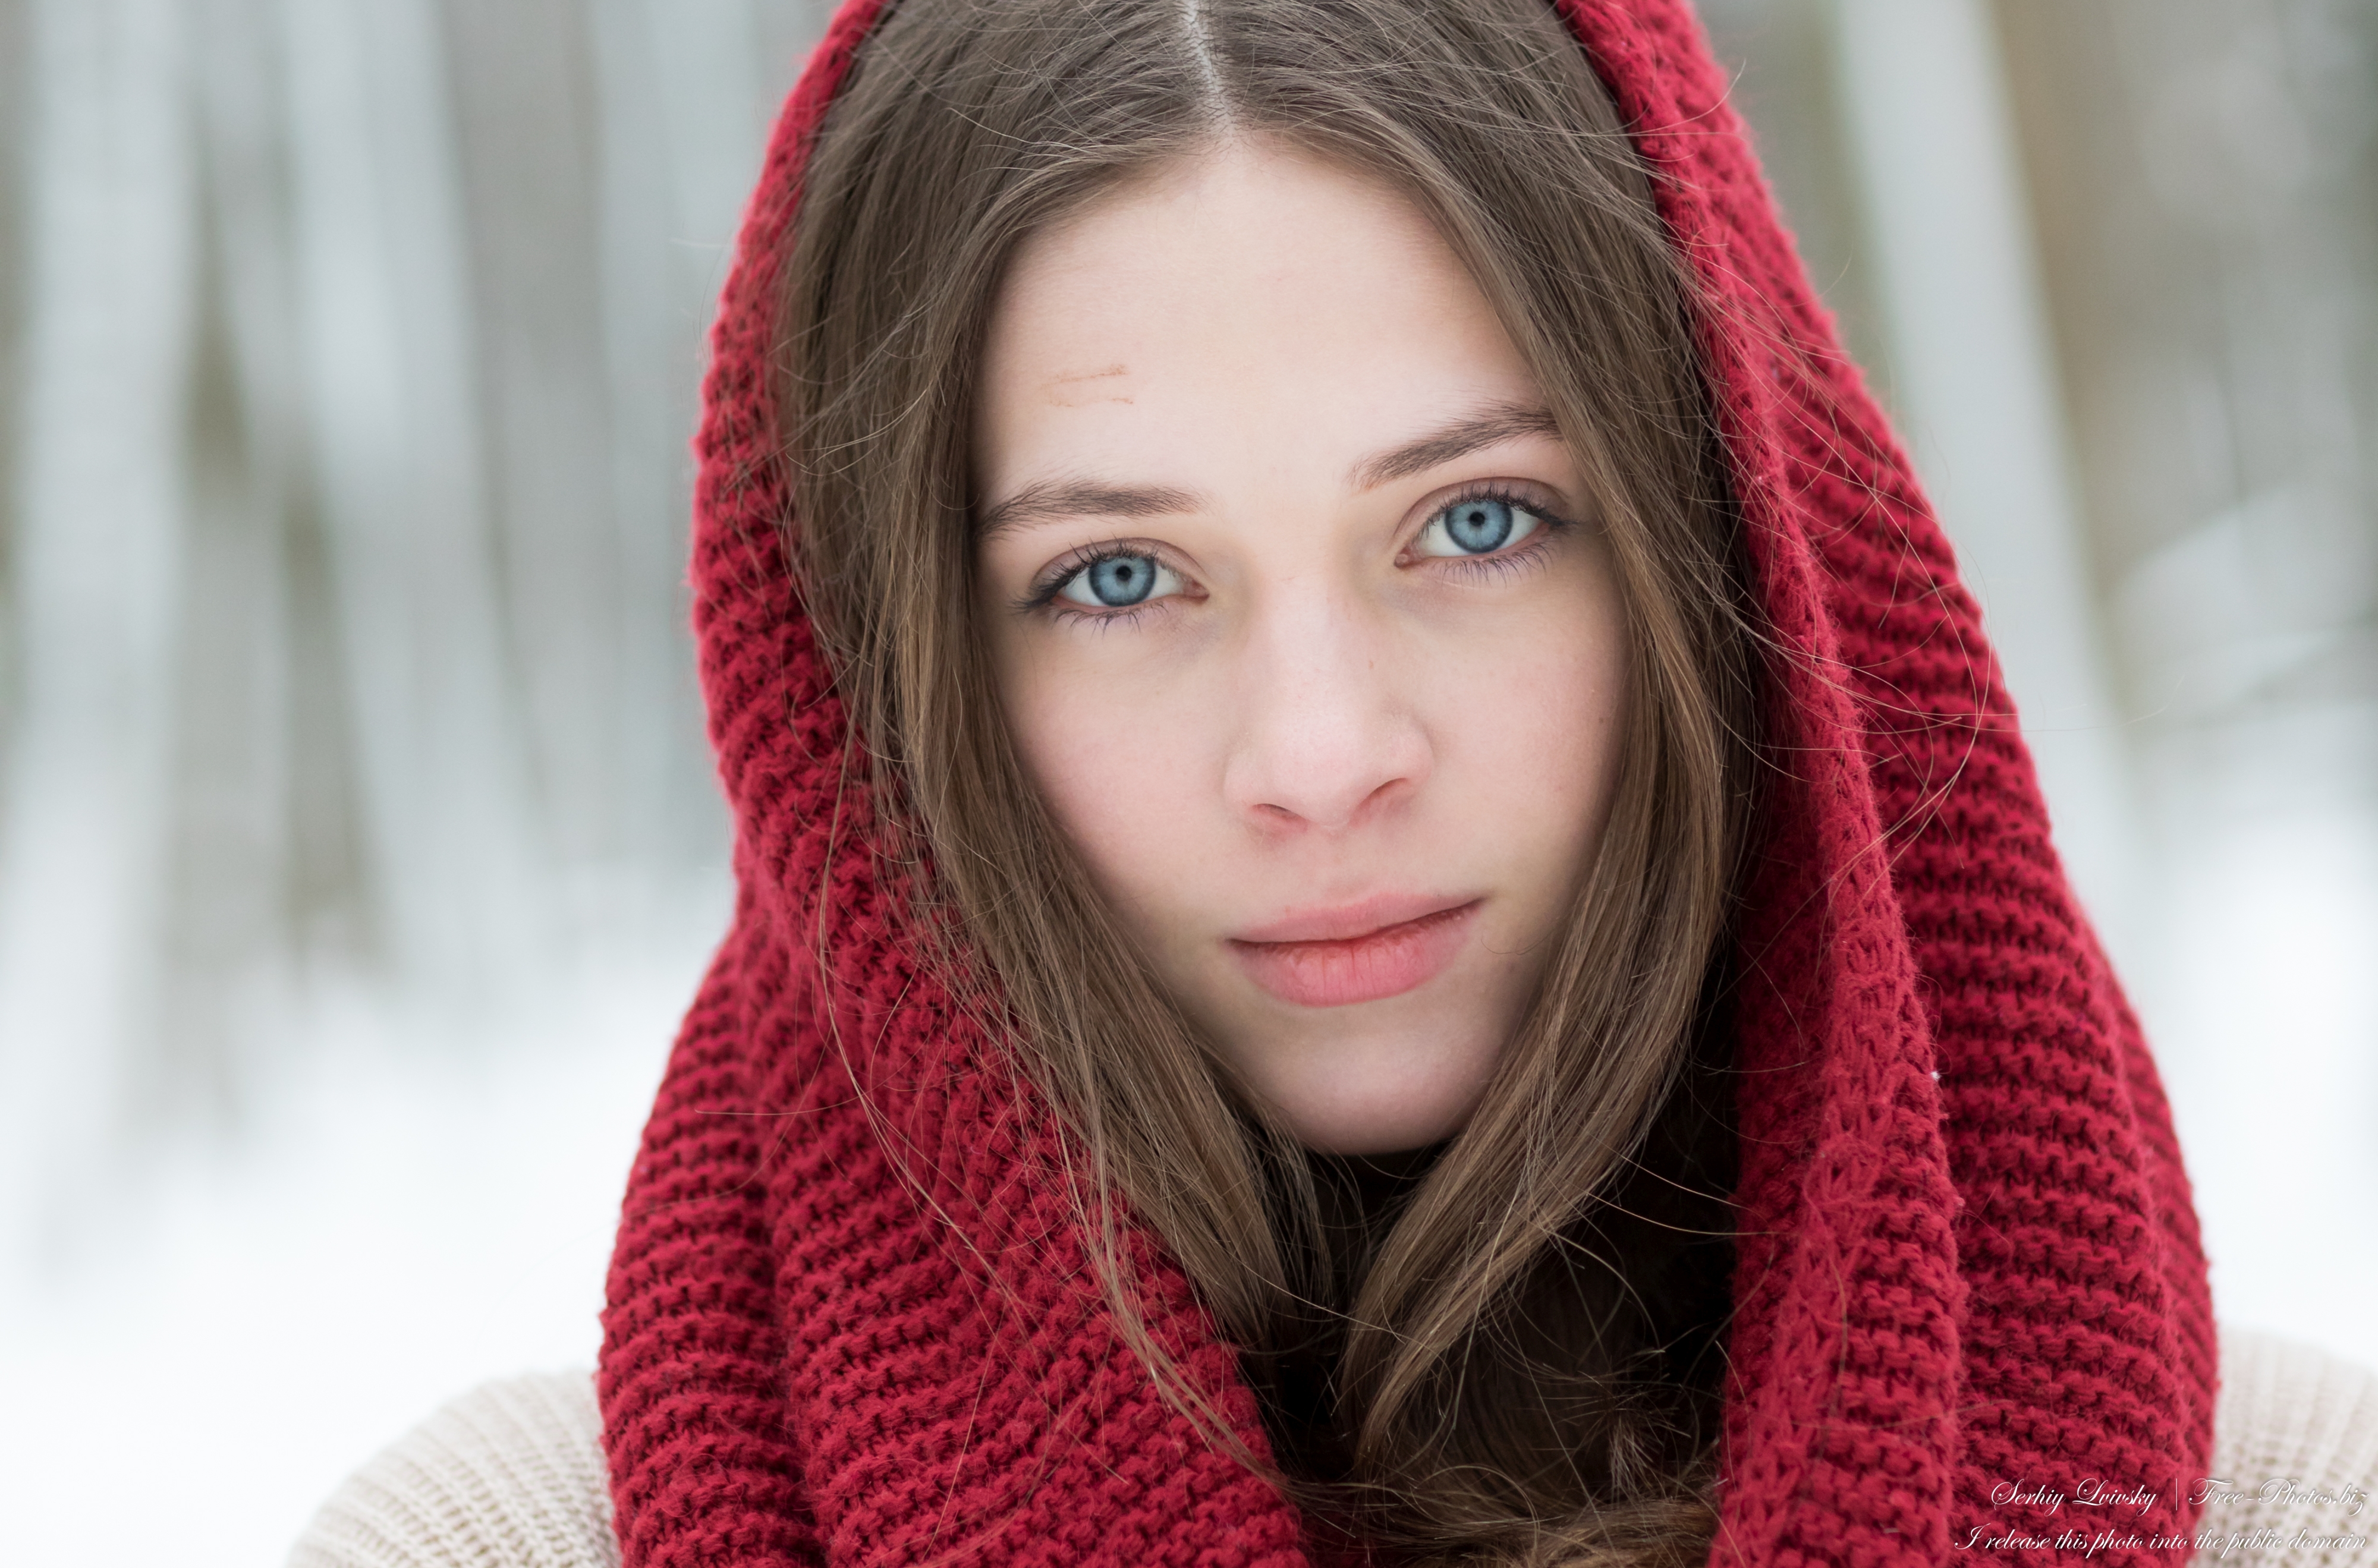 sophia_a_17-year-old_girl_with_blue_eyes_photographed_by_serhiy_lvivsky_in_jan_2022_22